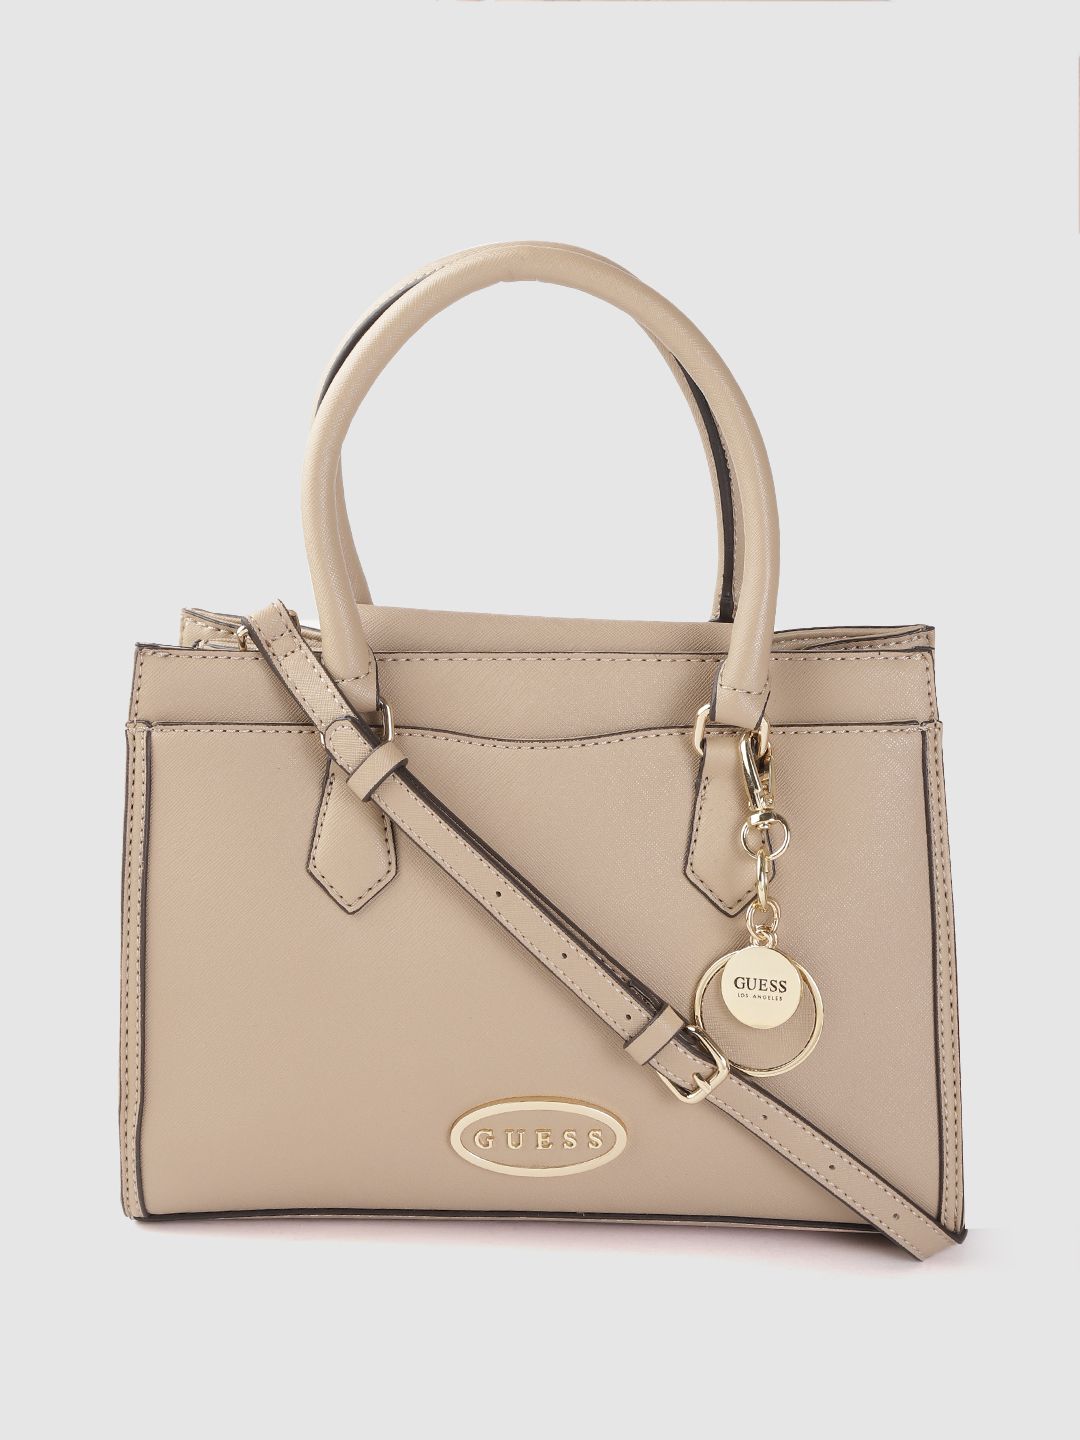 GUESS Beige Solid Structured Handheld Bag Price in India